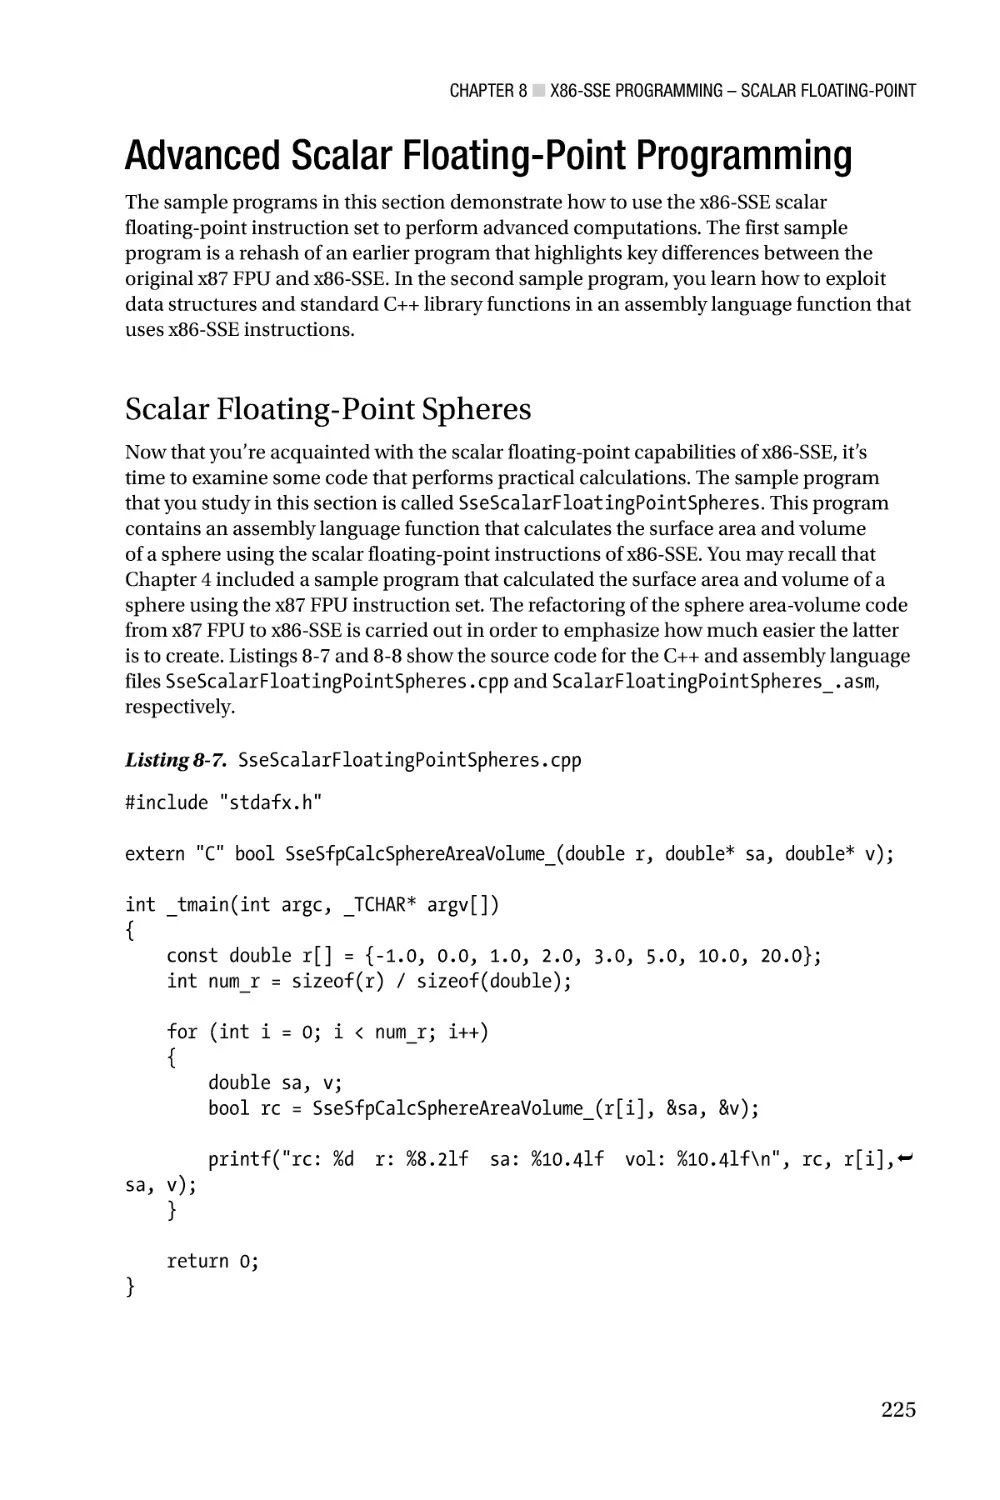 Advanced Scalar Floating-Point Programming
Scalar Floating-Point Spheres